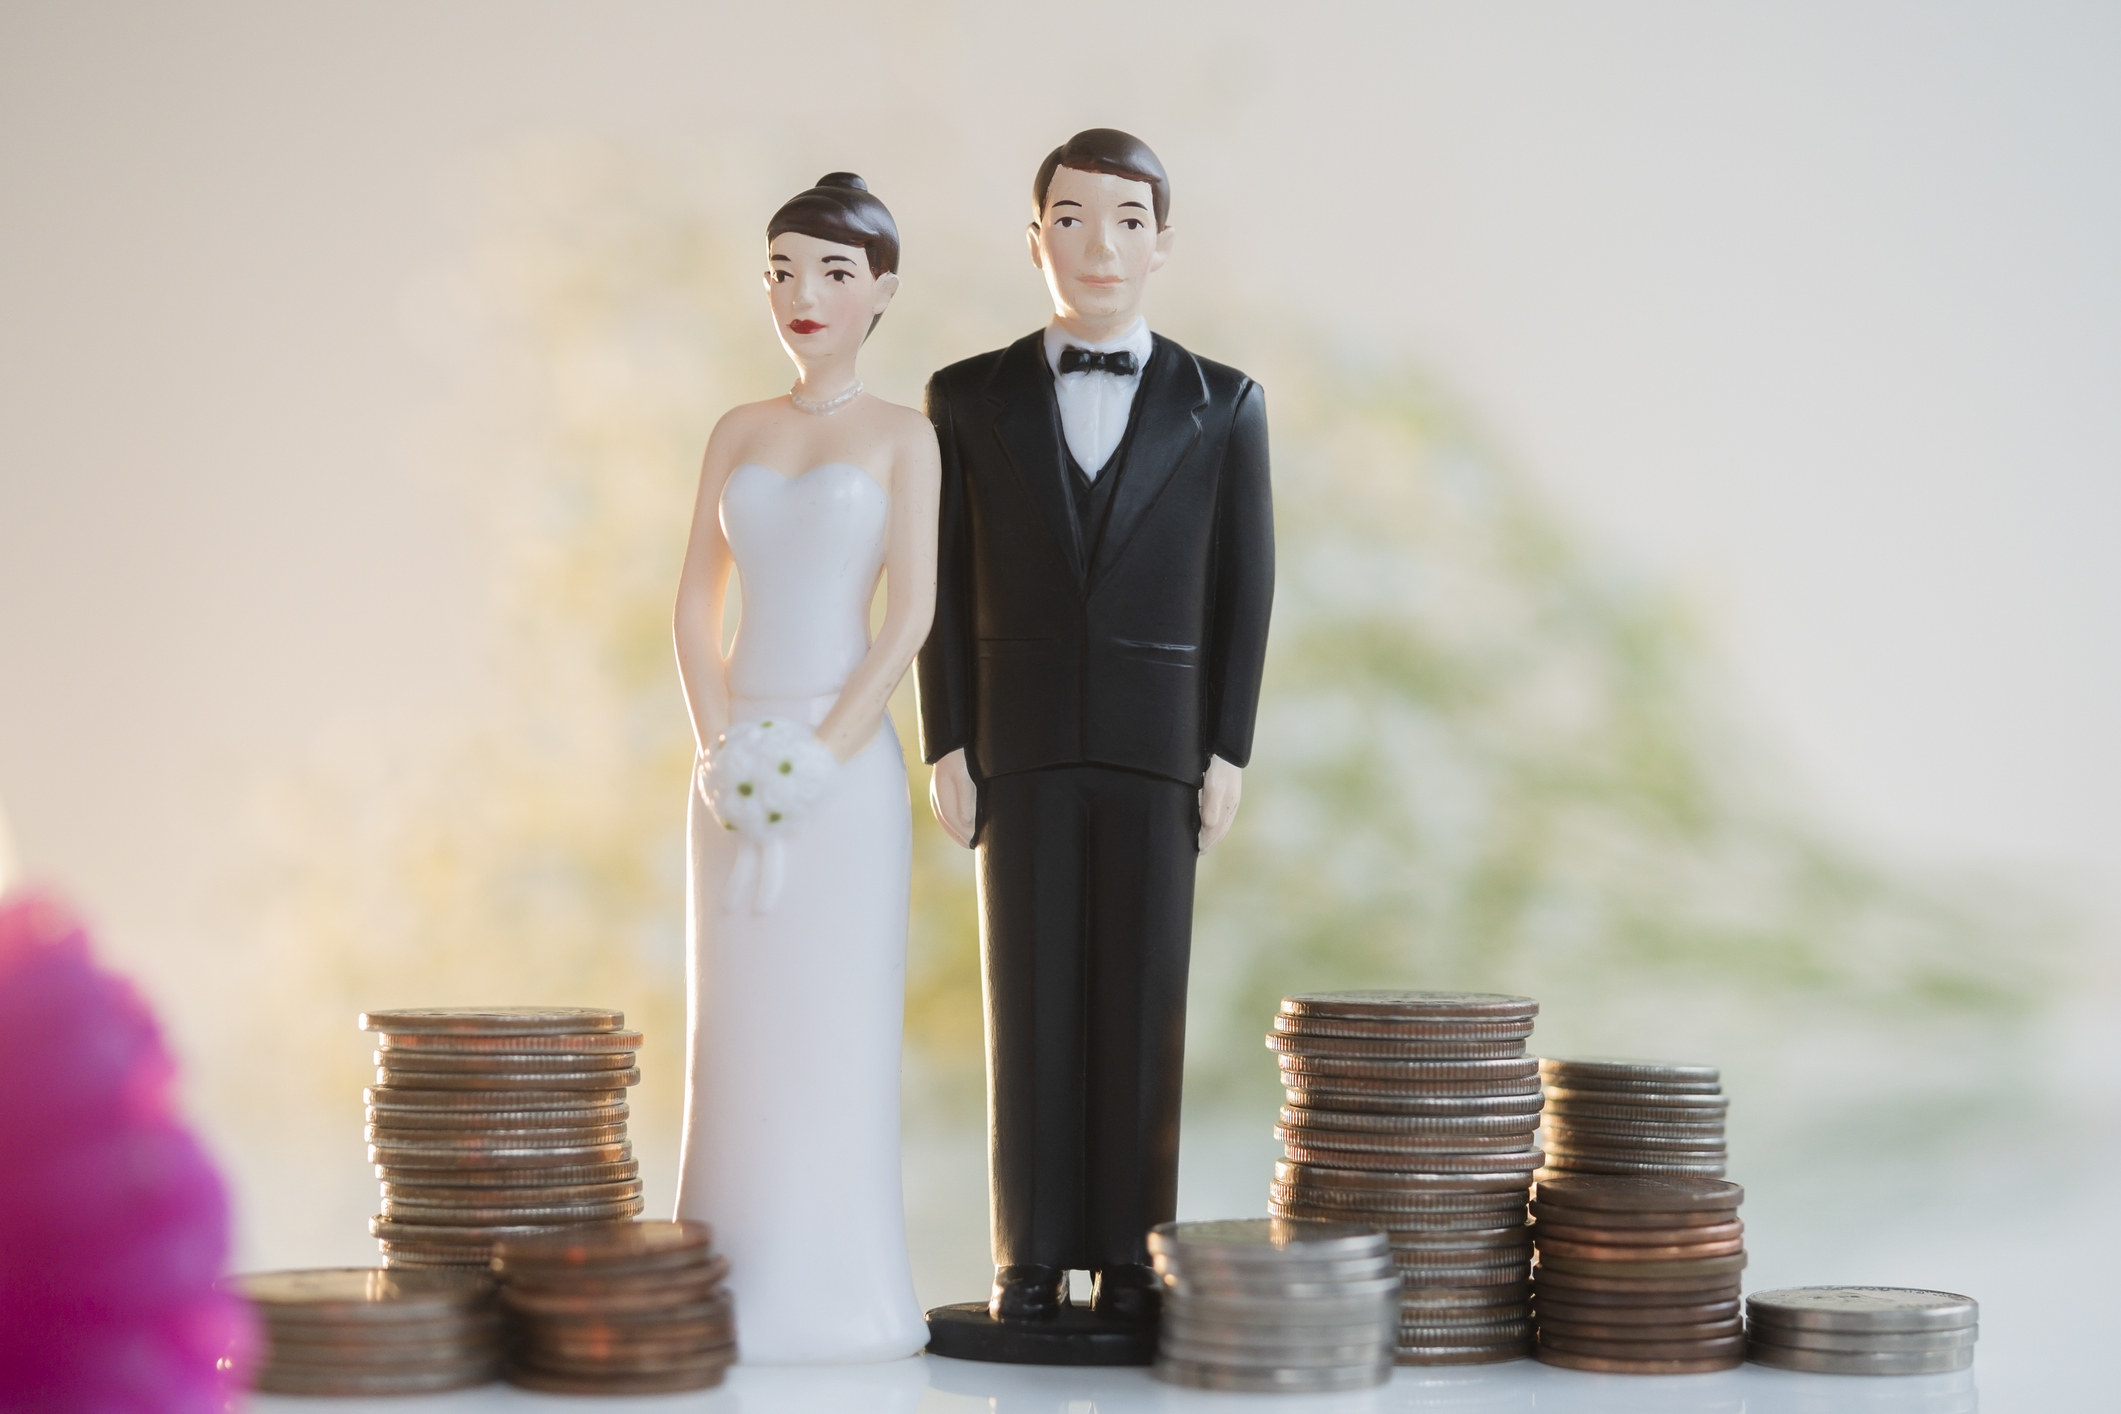 A wedding cake topper couple and stacks of coins